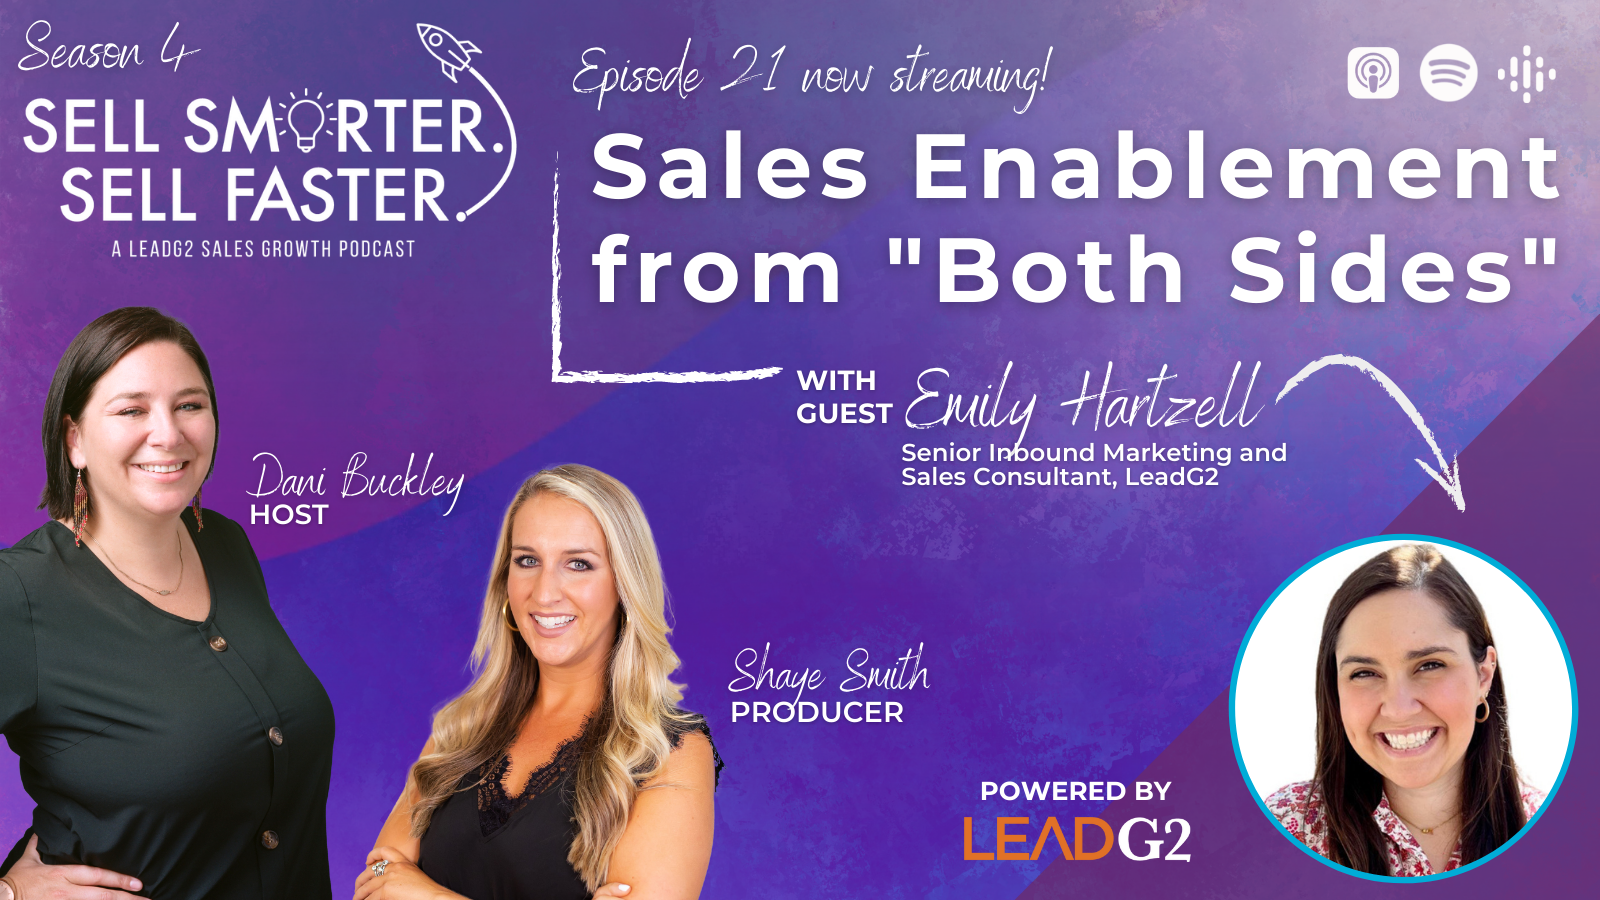 Sell Smarter. Sell Faster Podcast. Episode 21 - Sales Enablement with Emily Hartzell